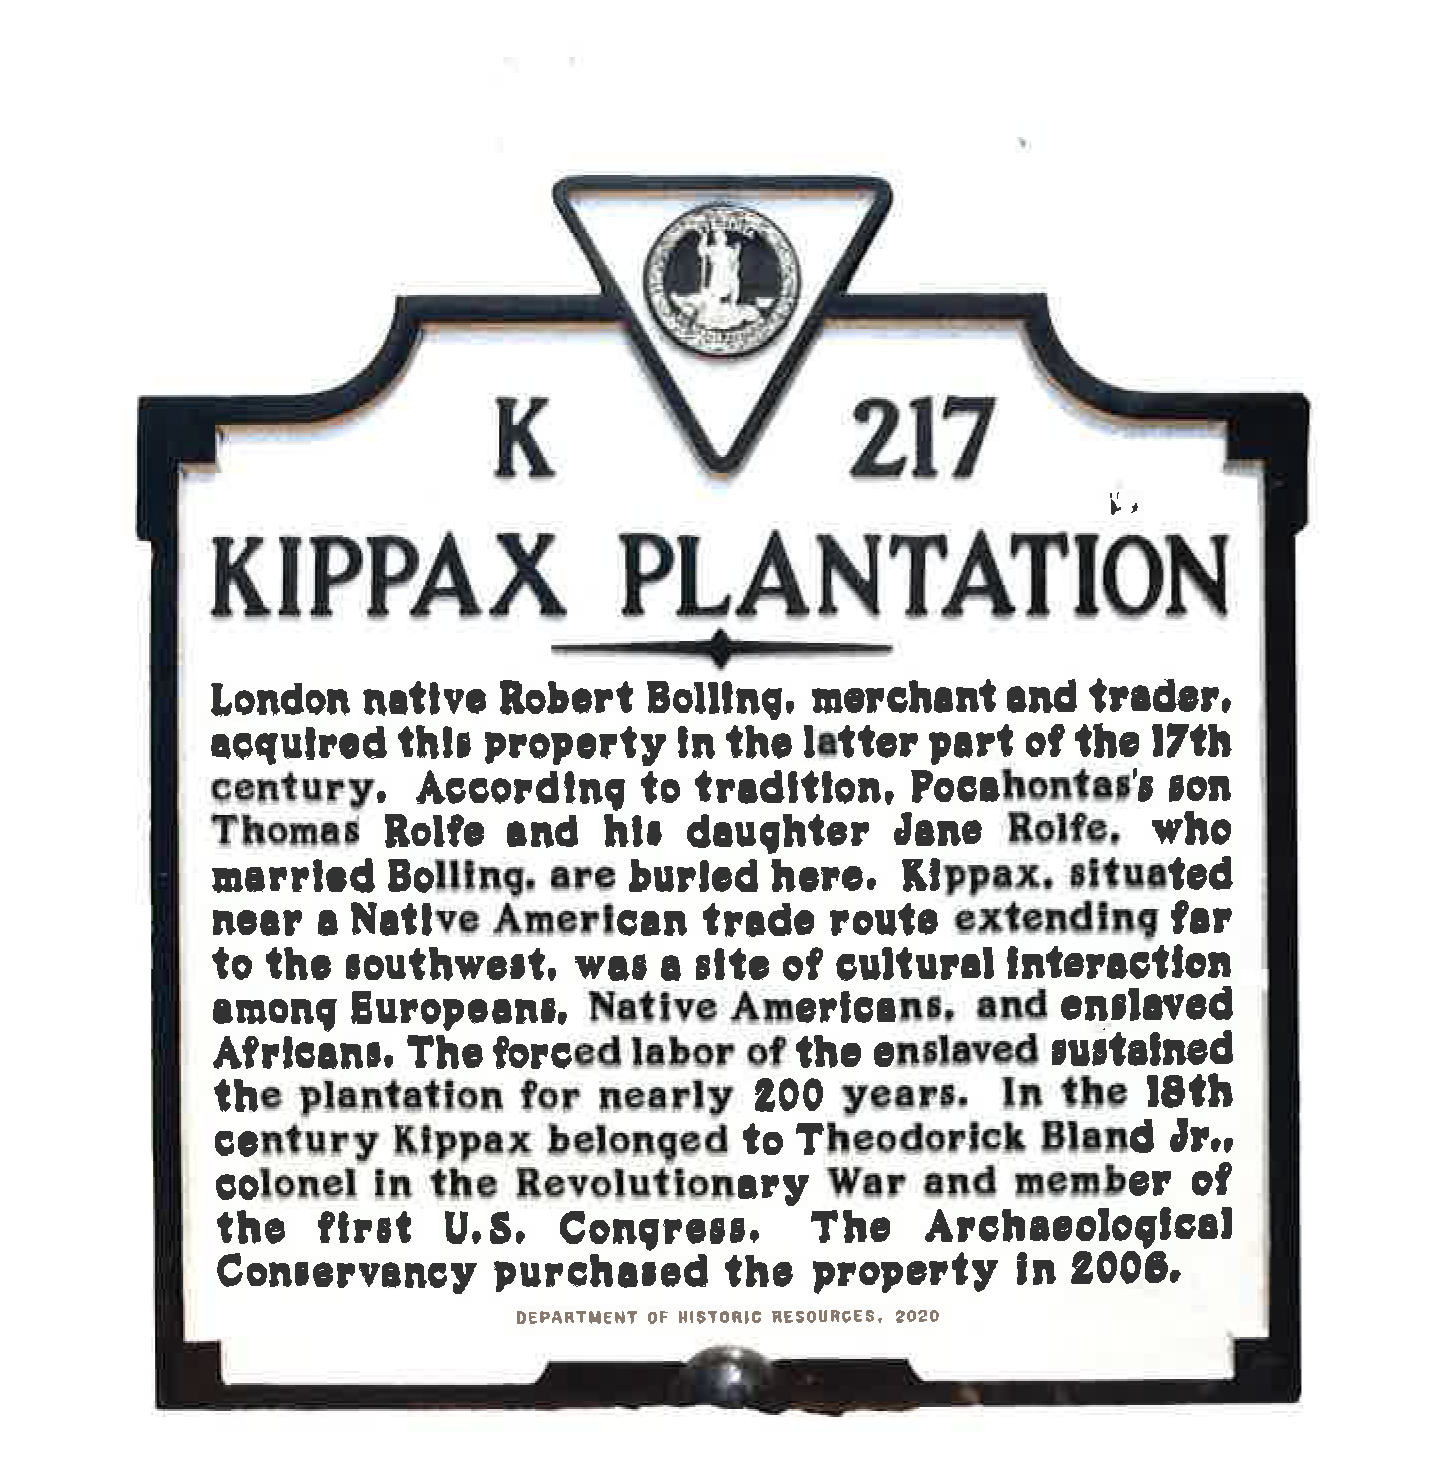 The image is of the Kippax Plantation Marker. It explains the historical importance of Kippax Plantation